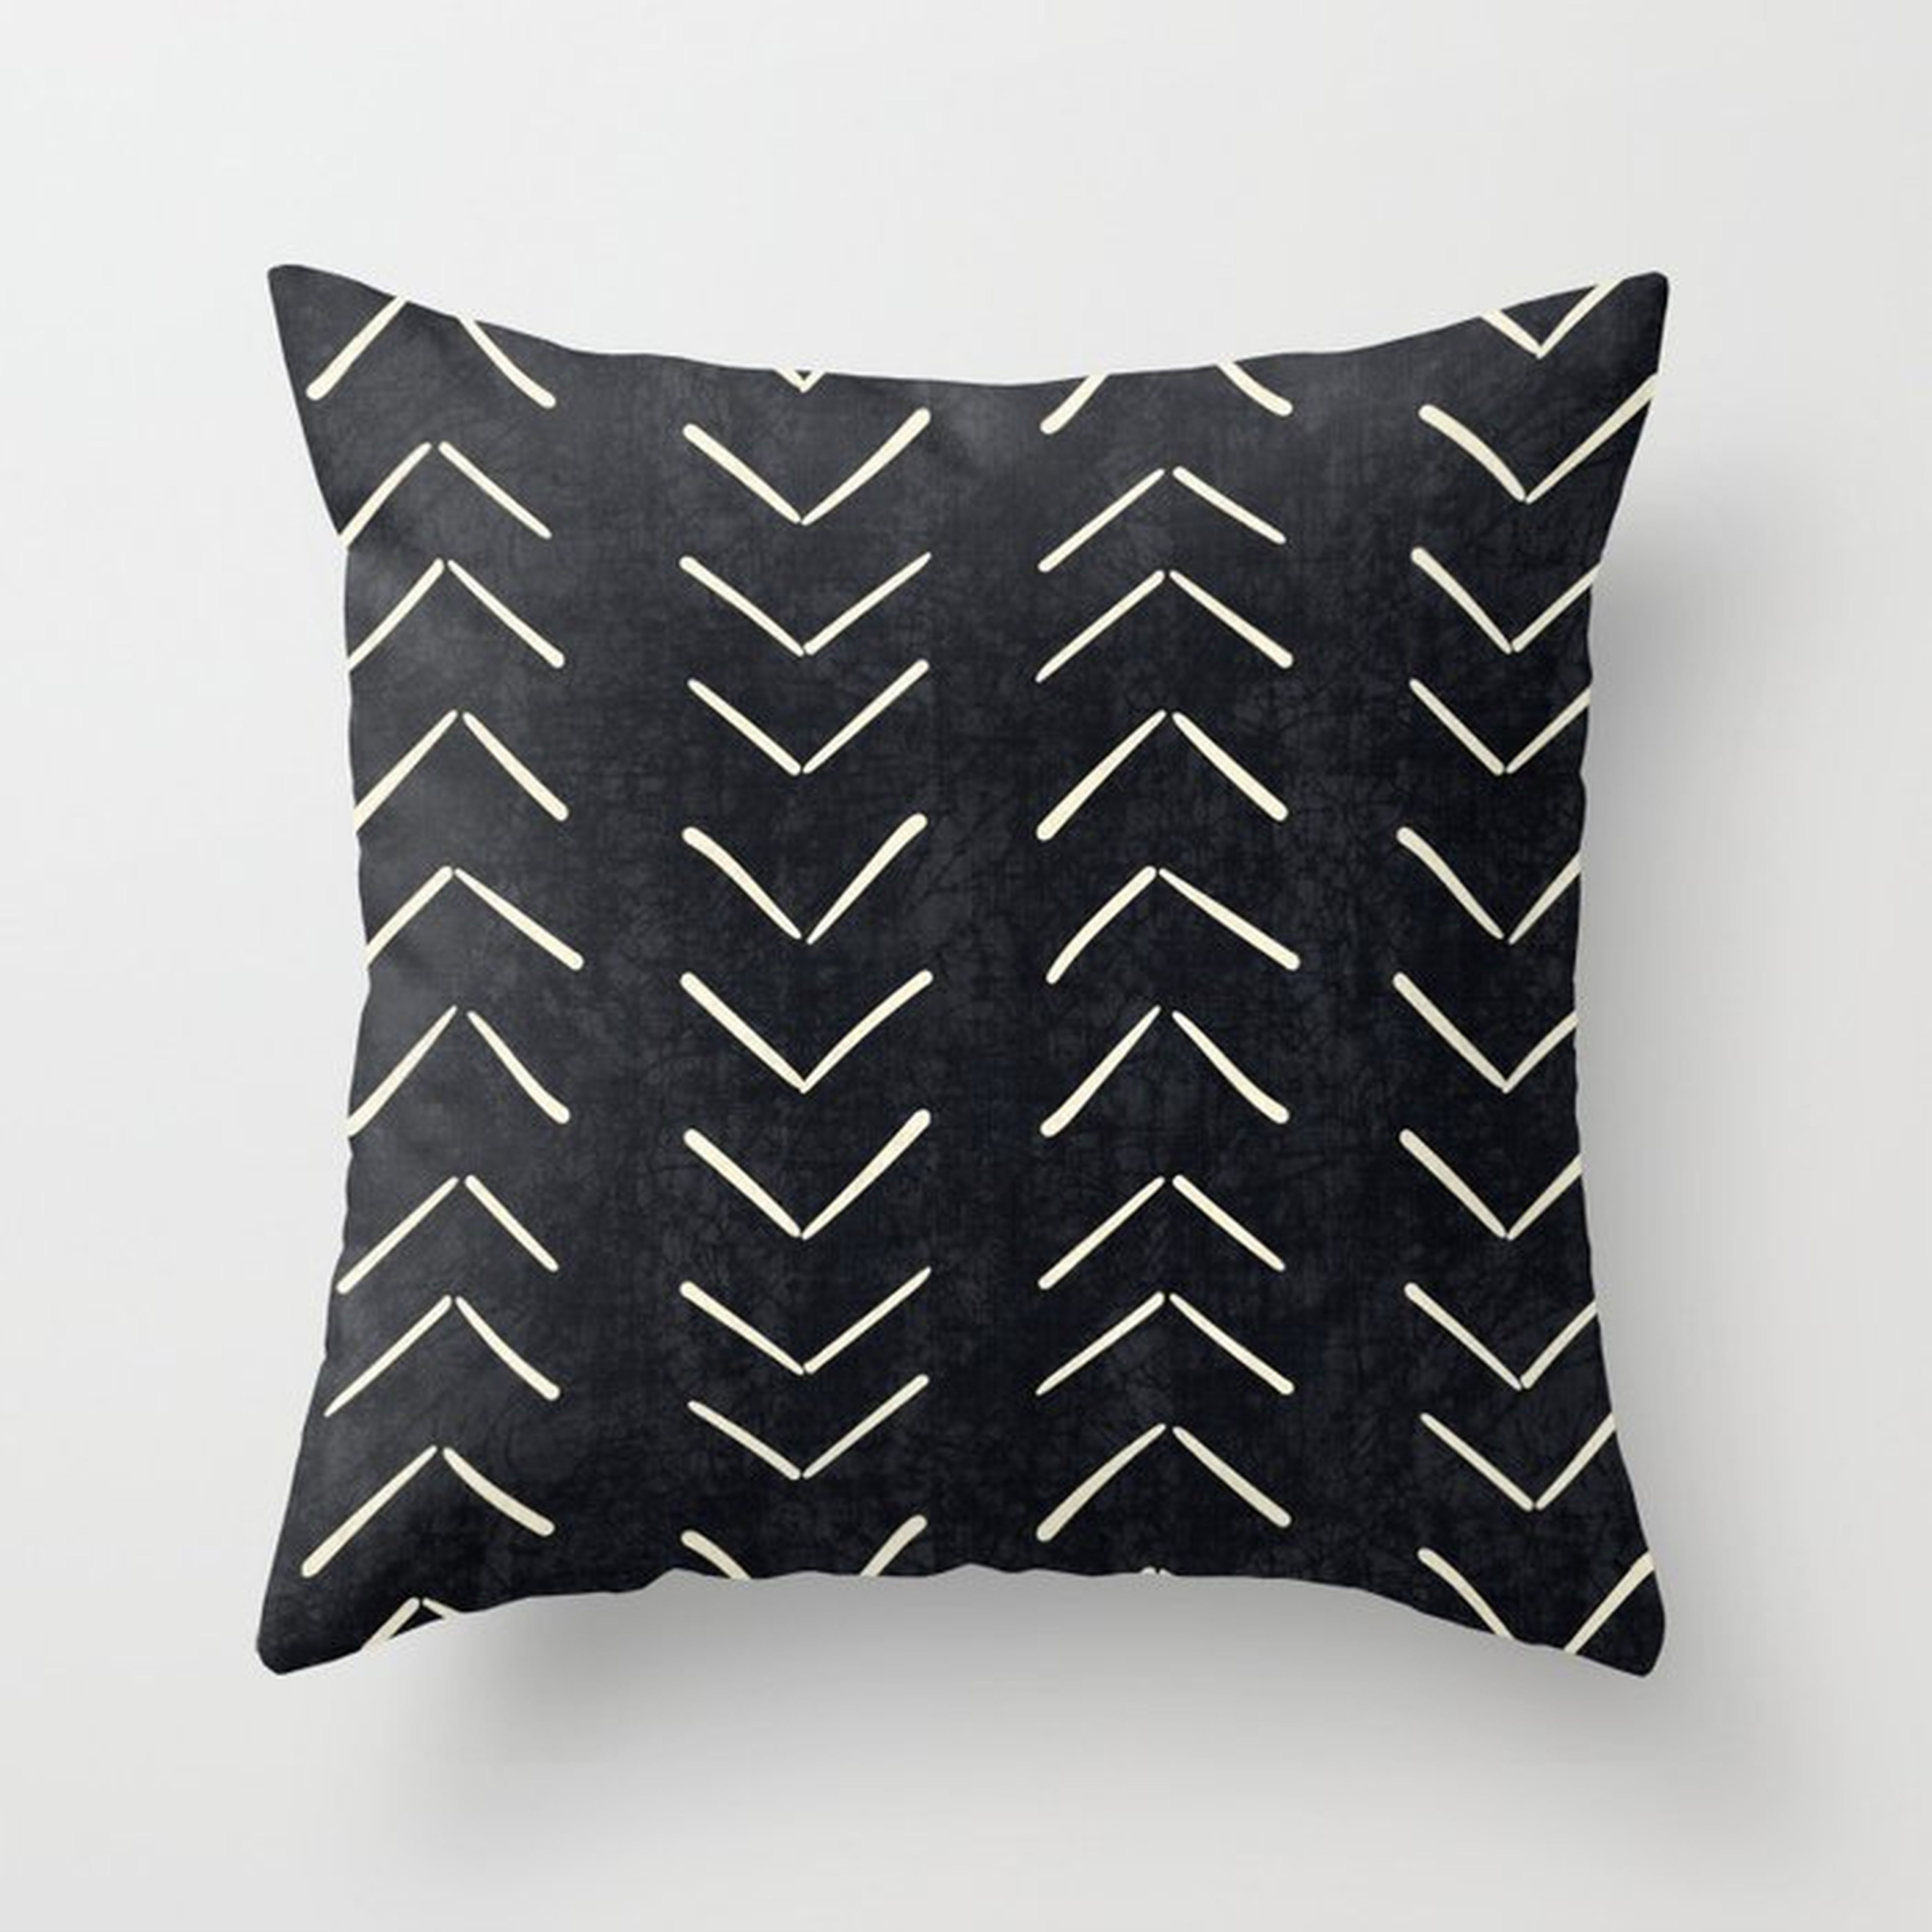 Mudcloth Big Arrows in Black and White Throw Pillow with Insert- 20" x 20" Indoor Pillow - Society6